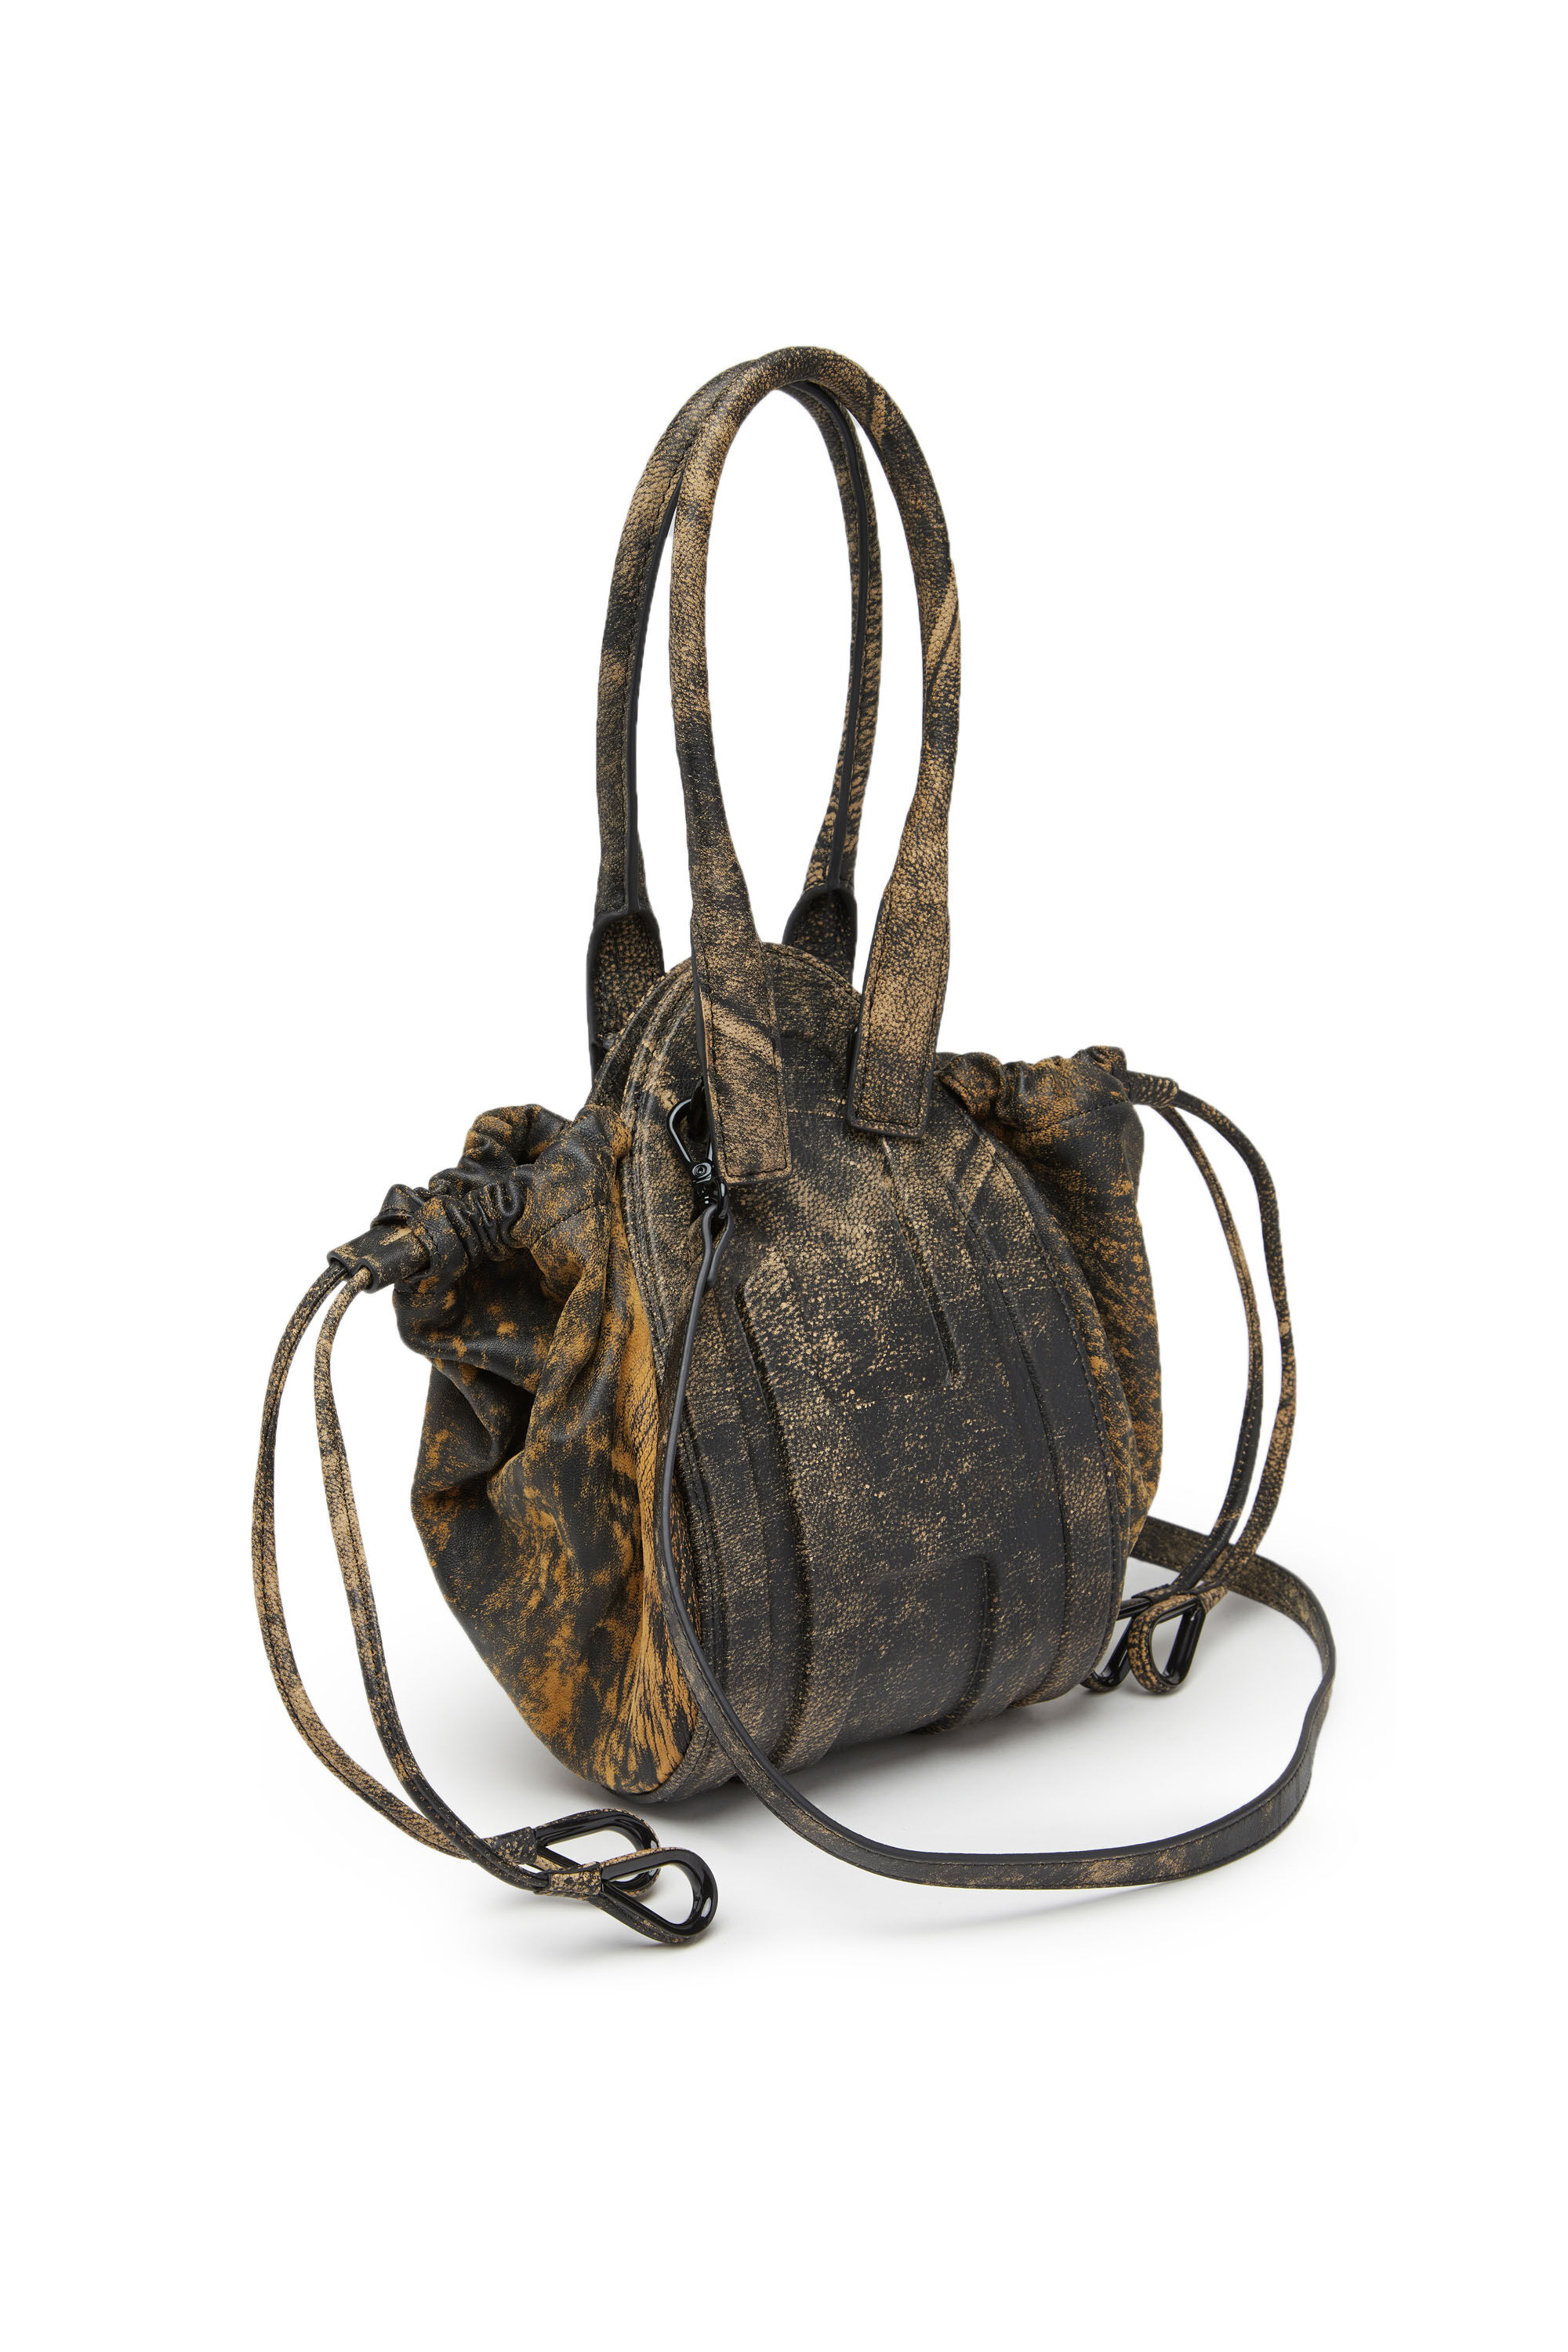 1DR-FOLD XS Woman: Oval logo handbag in marbled leather | Diesel